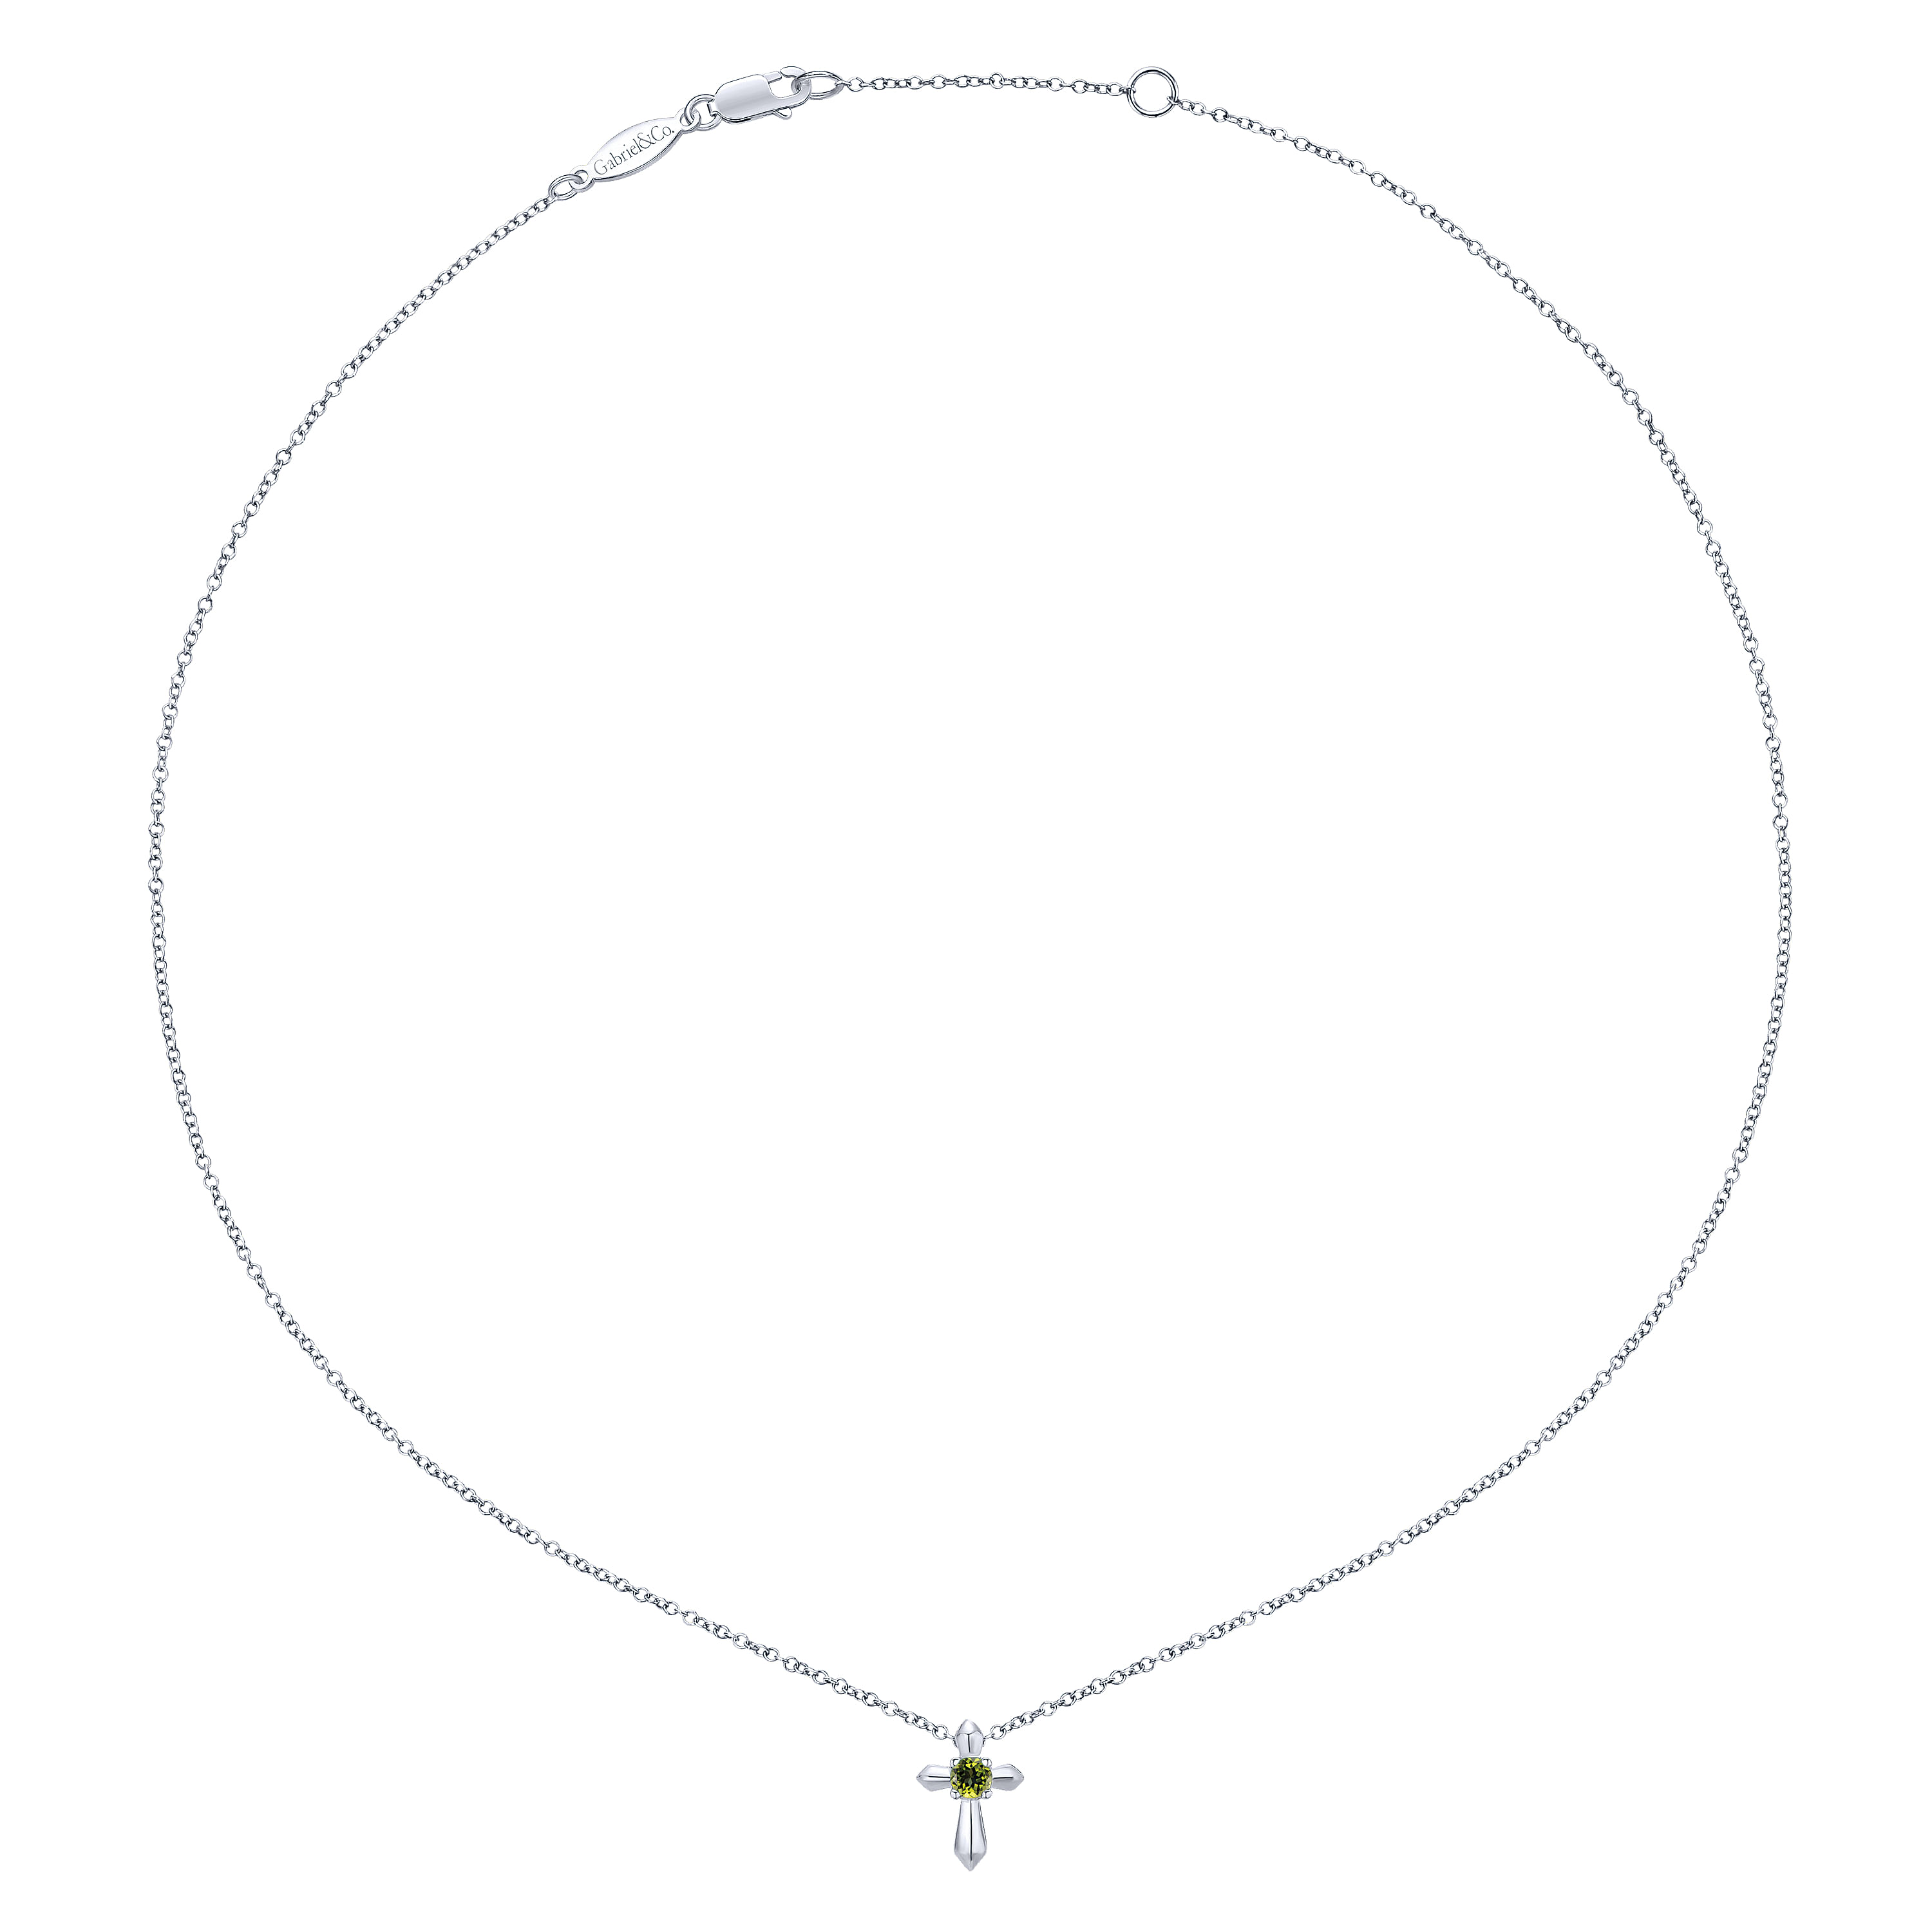 925 Sterling Silver Round Peridot Cross Necklace